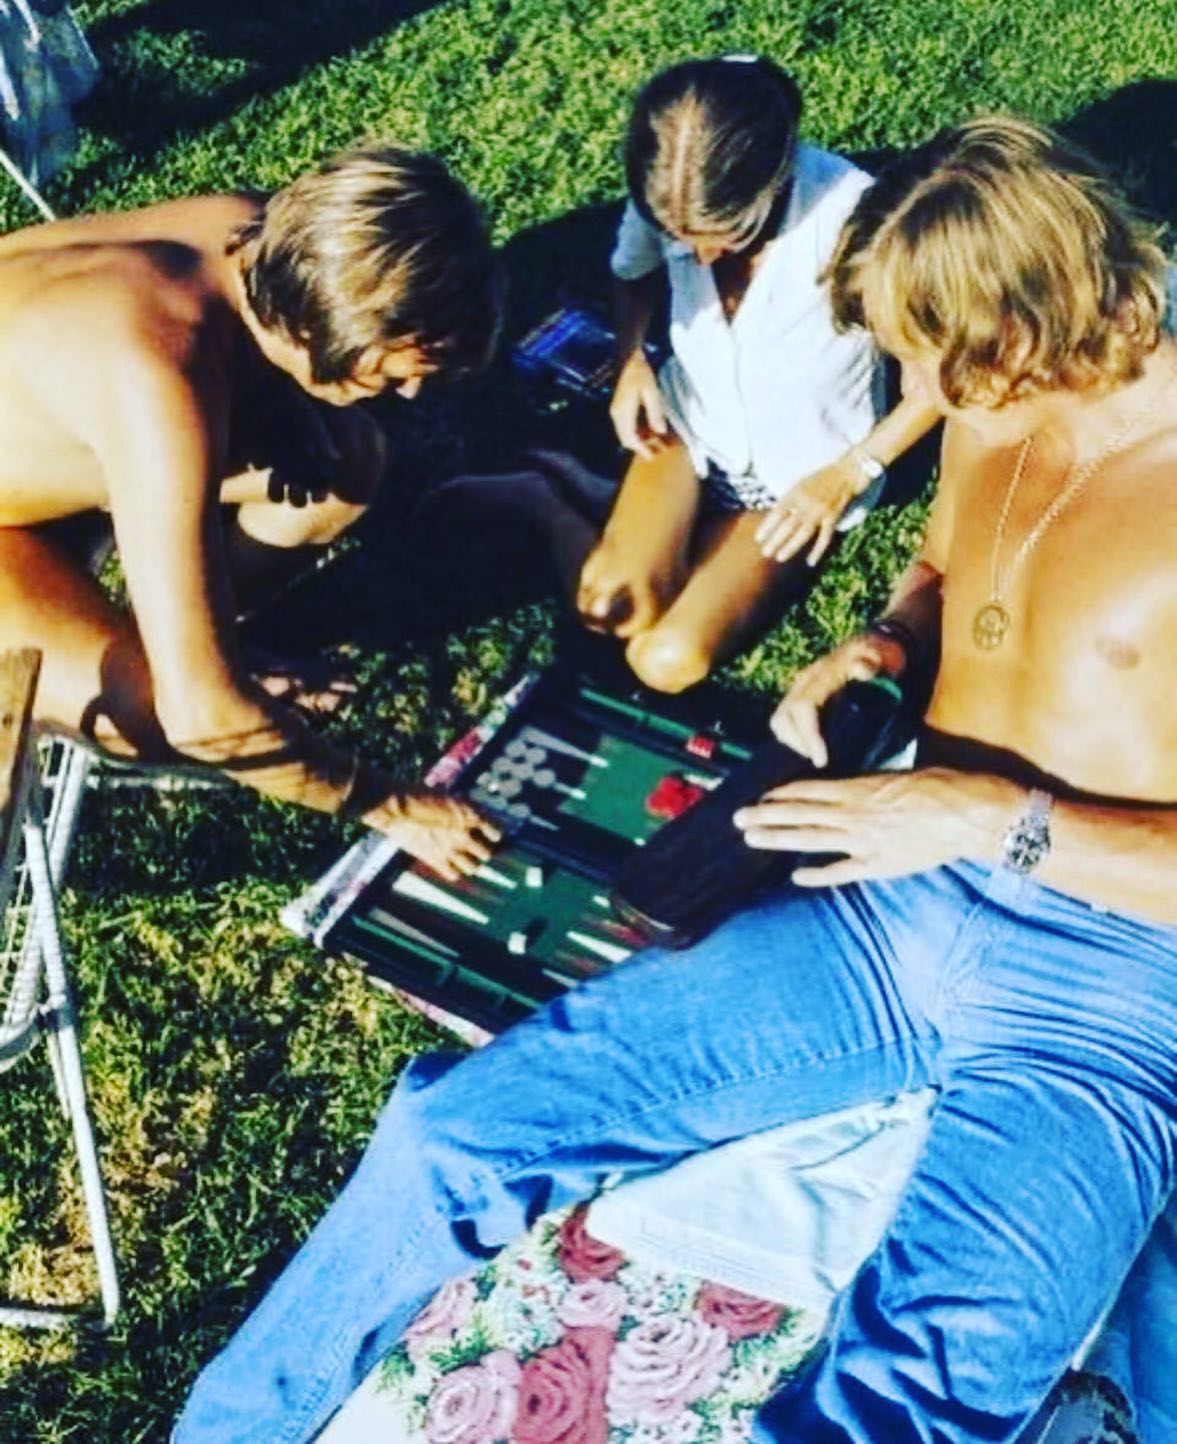 Did you know James Hunt claimed he made more money during the 1976 season playing backgammon at the tracks with the other drivers and teams than he did from his McLaren salary. Probably true considering Teddy Mayer said: “James was the cheapest World Champion we had ever employed”. I’m sure he wasn’t so cheap in ‘77!